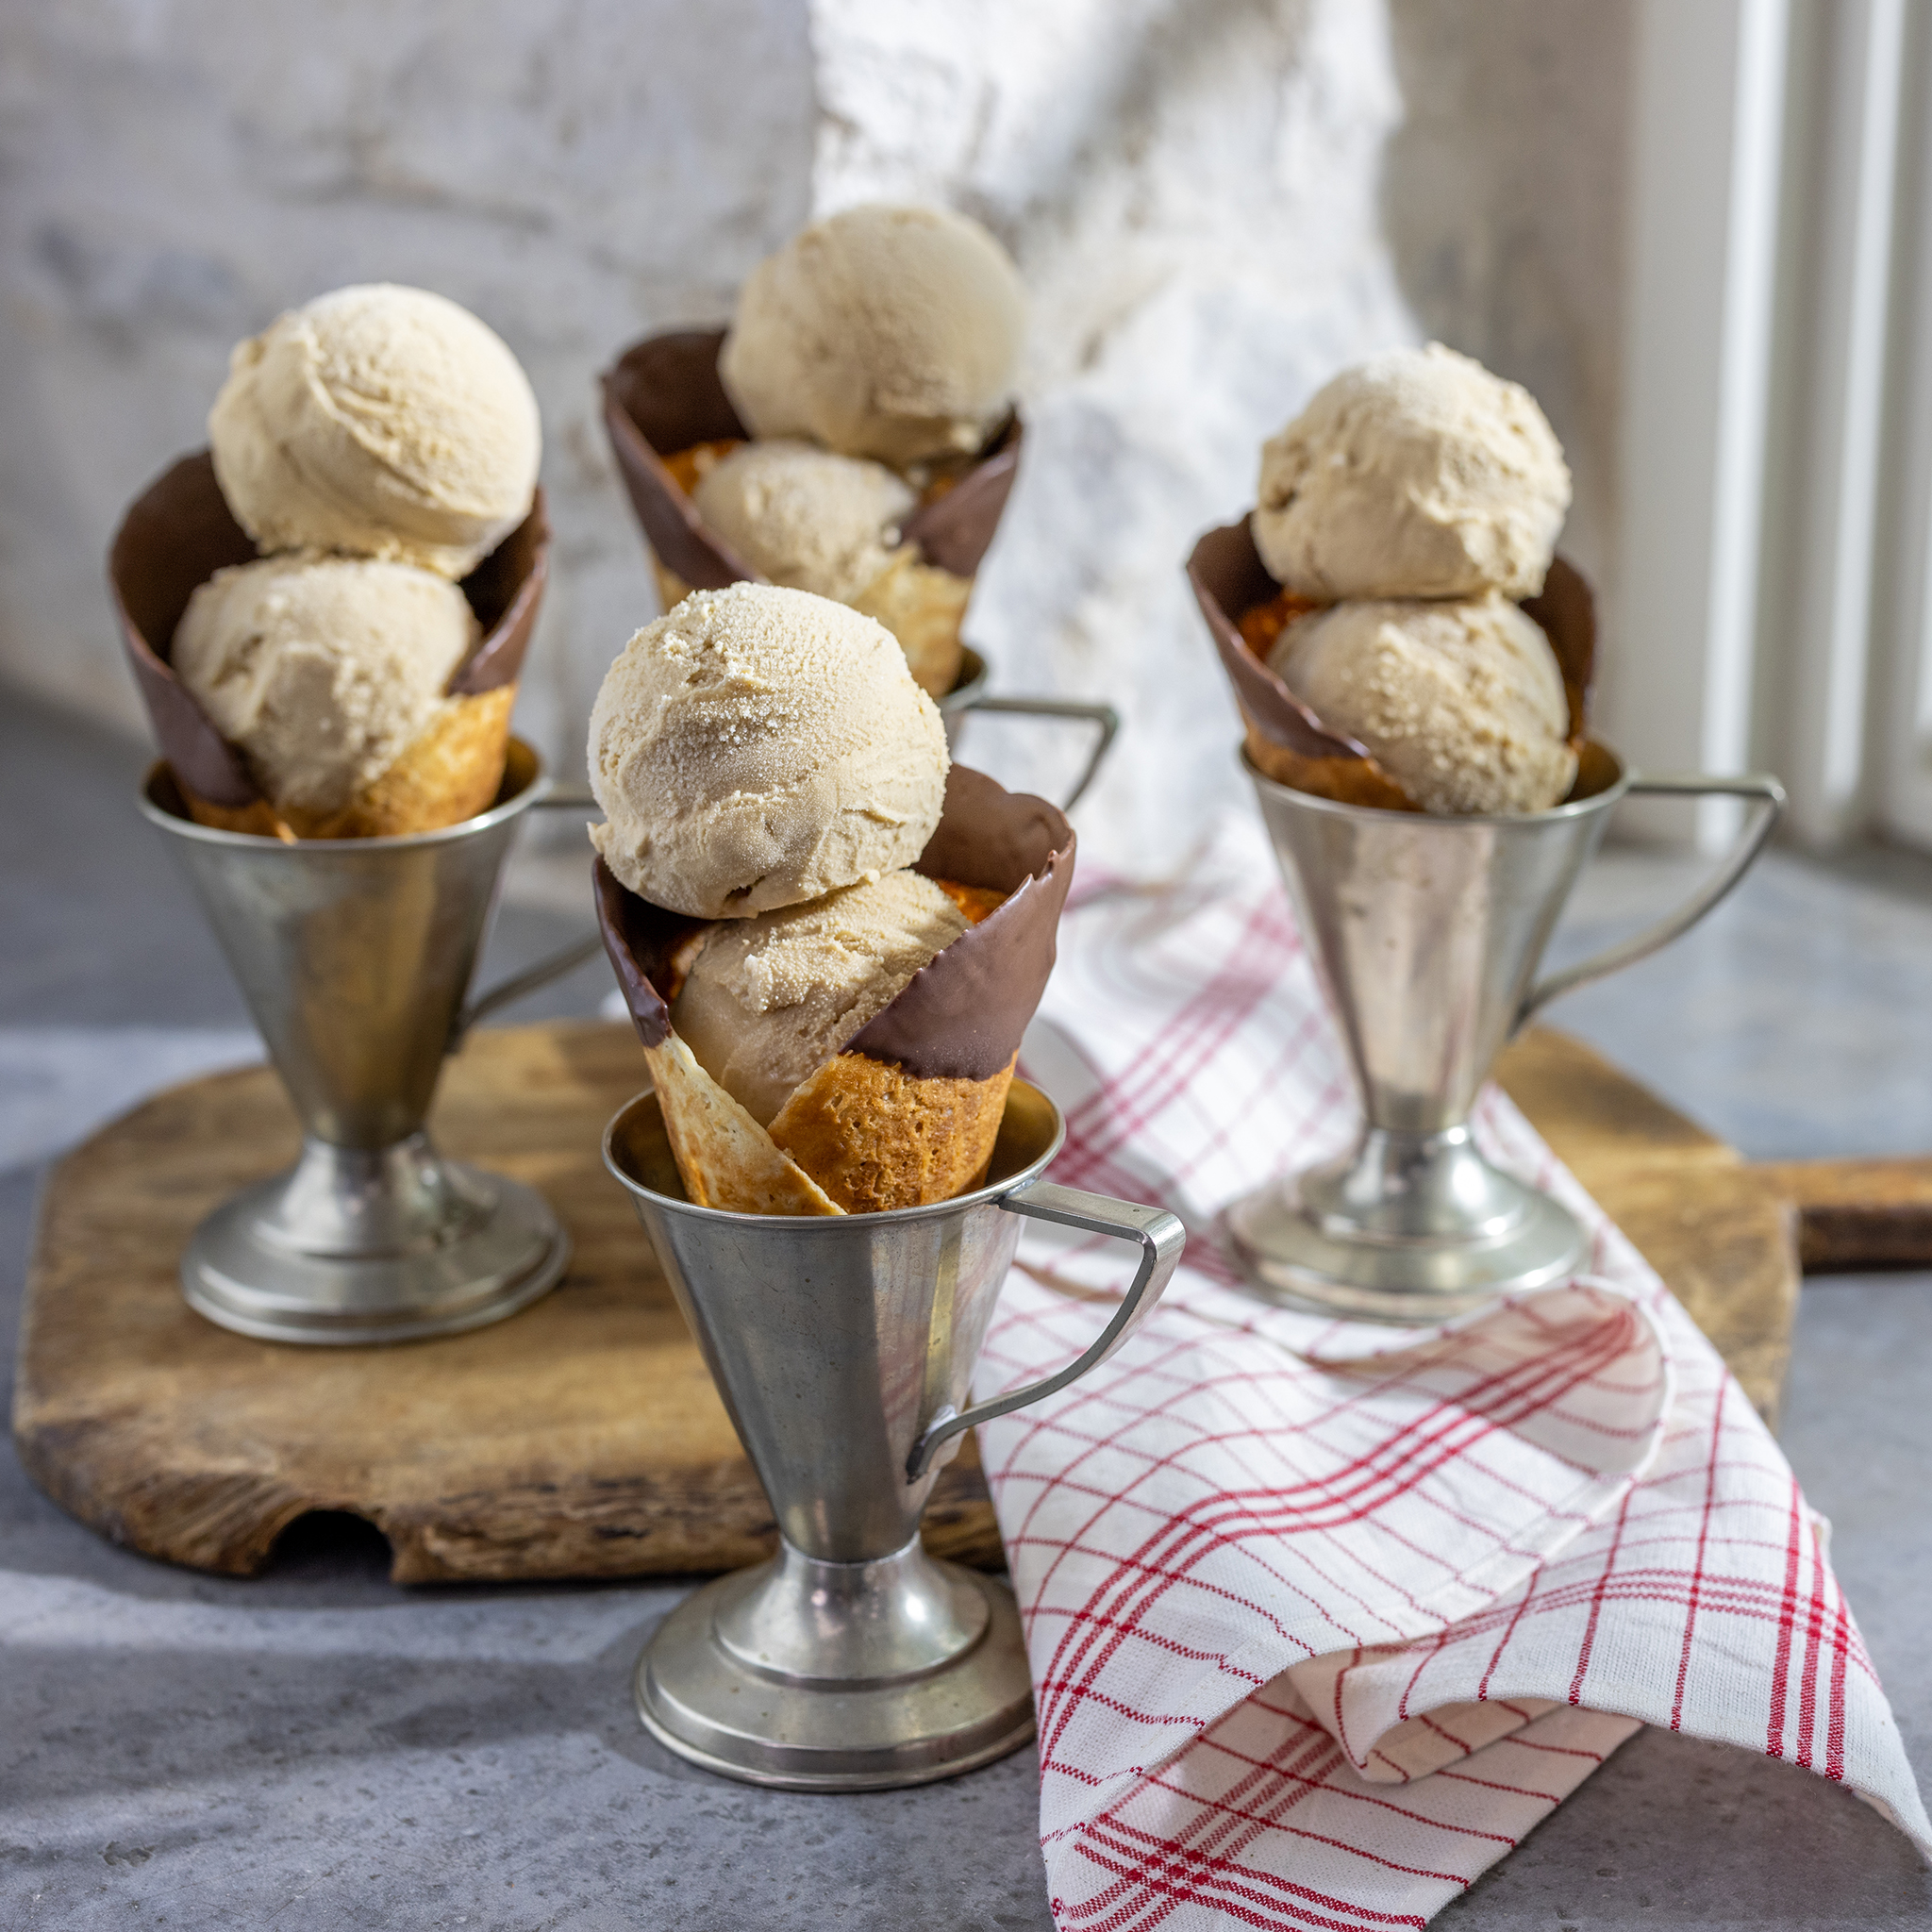 Joanna Gaines' Coffee Gelato and Chocolate-Dipped Waffle Cones